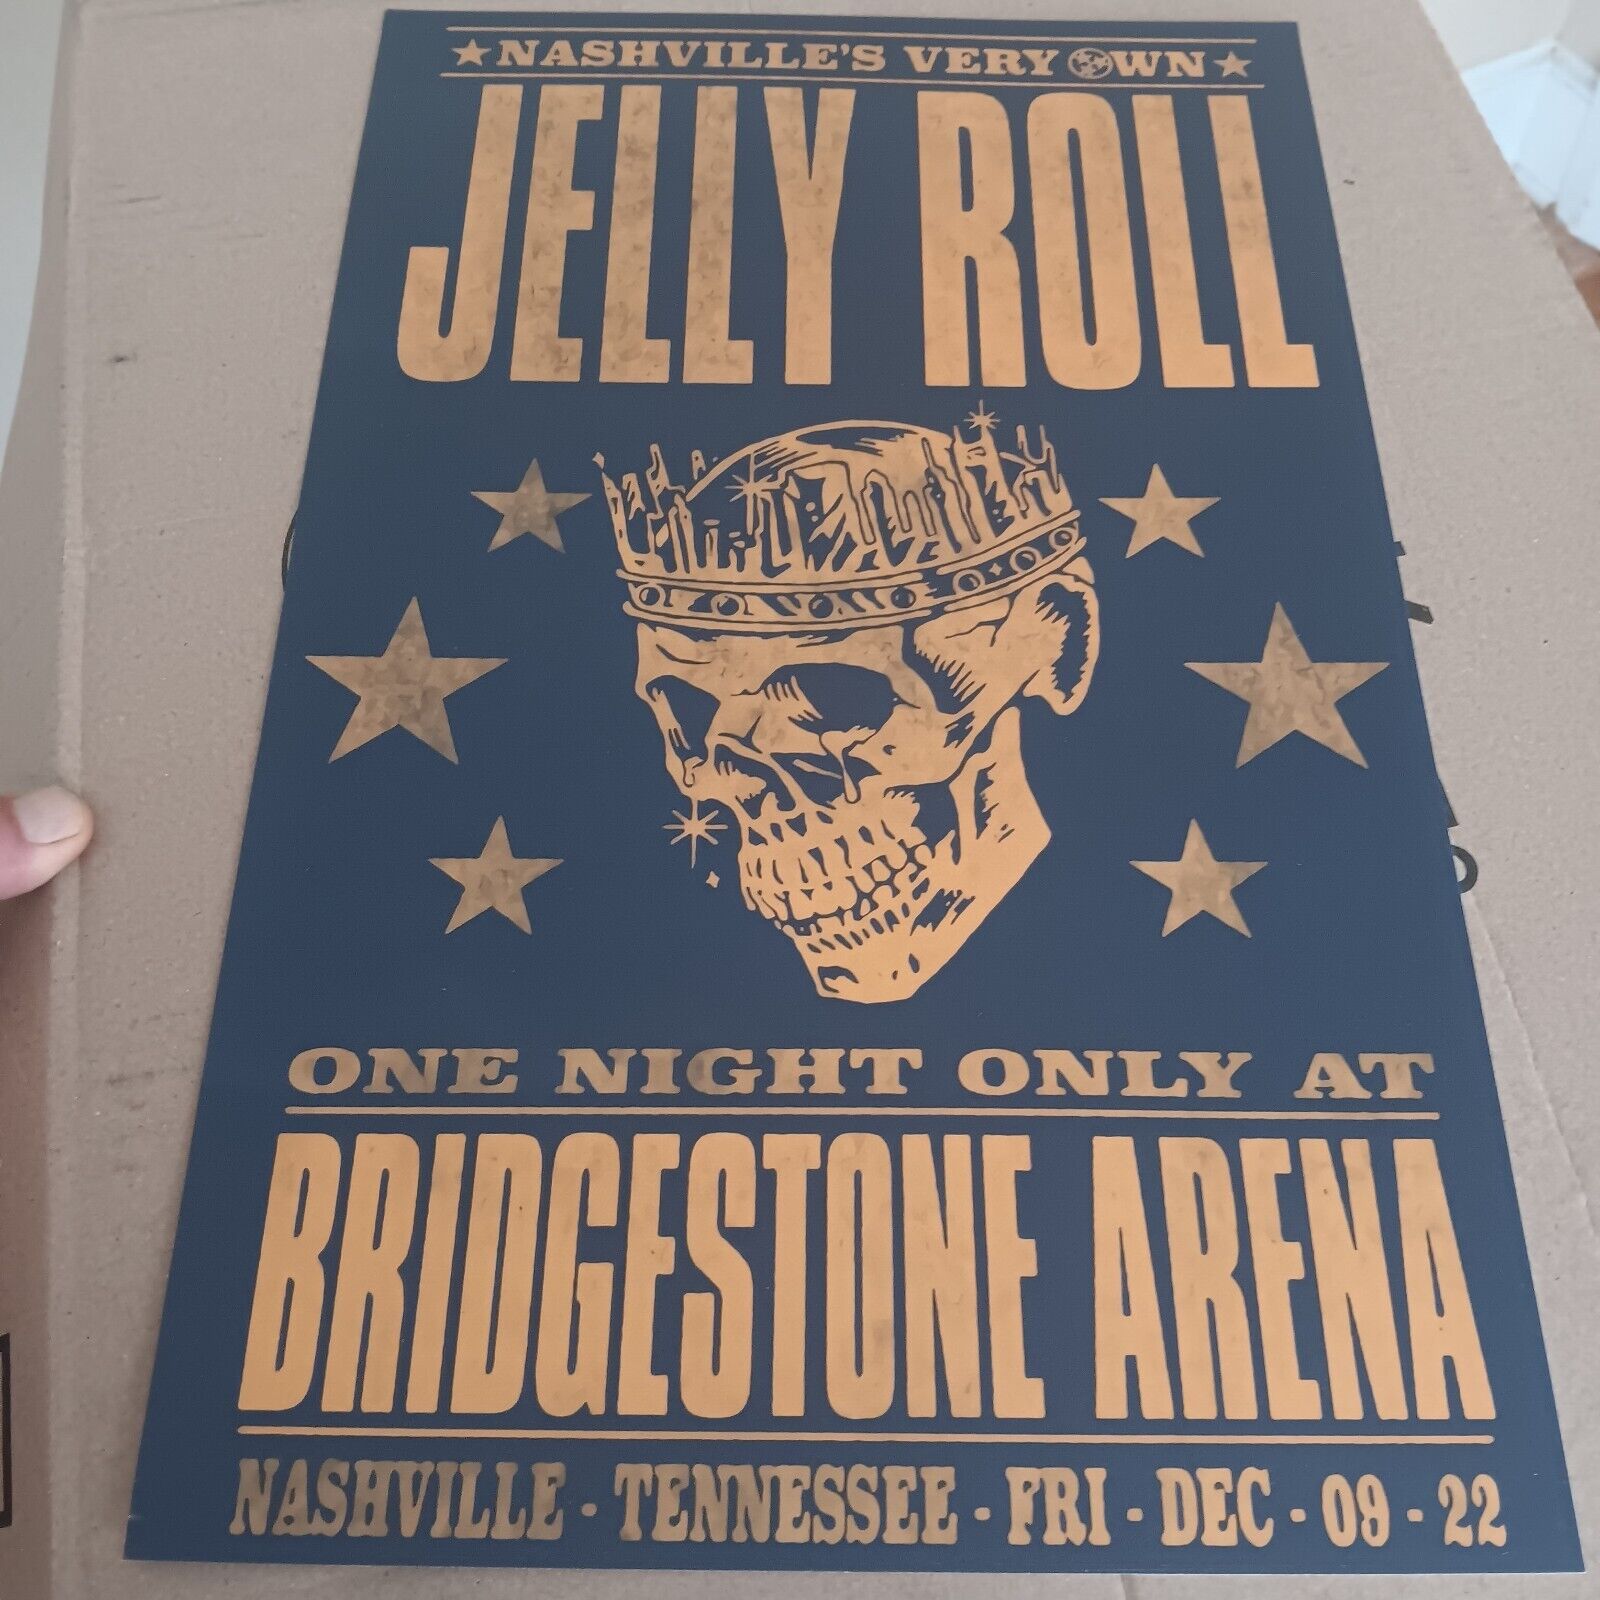 JELLY ROLL LIVE IN NASHVILLE 2022 GIG POSTER